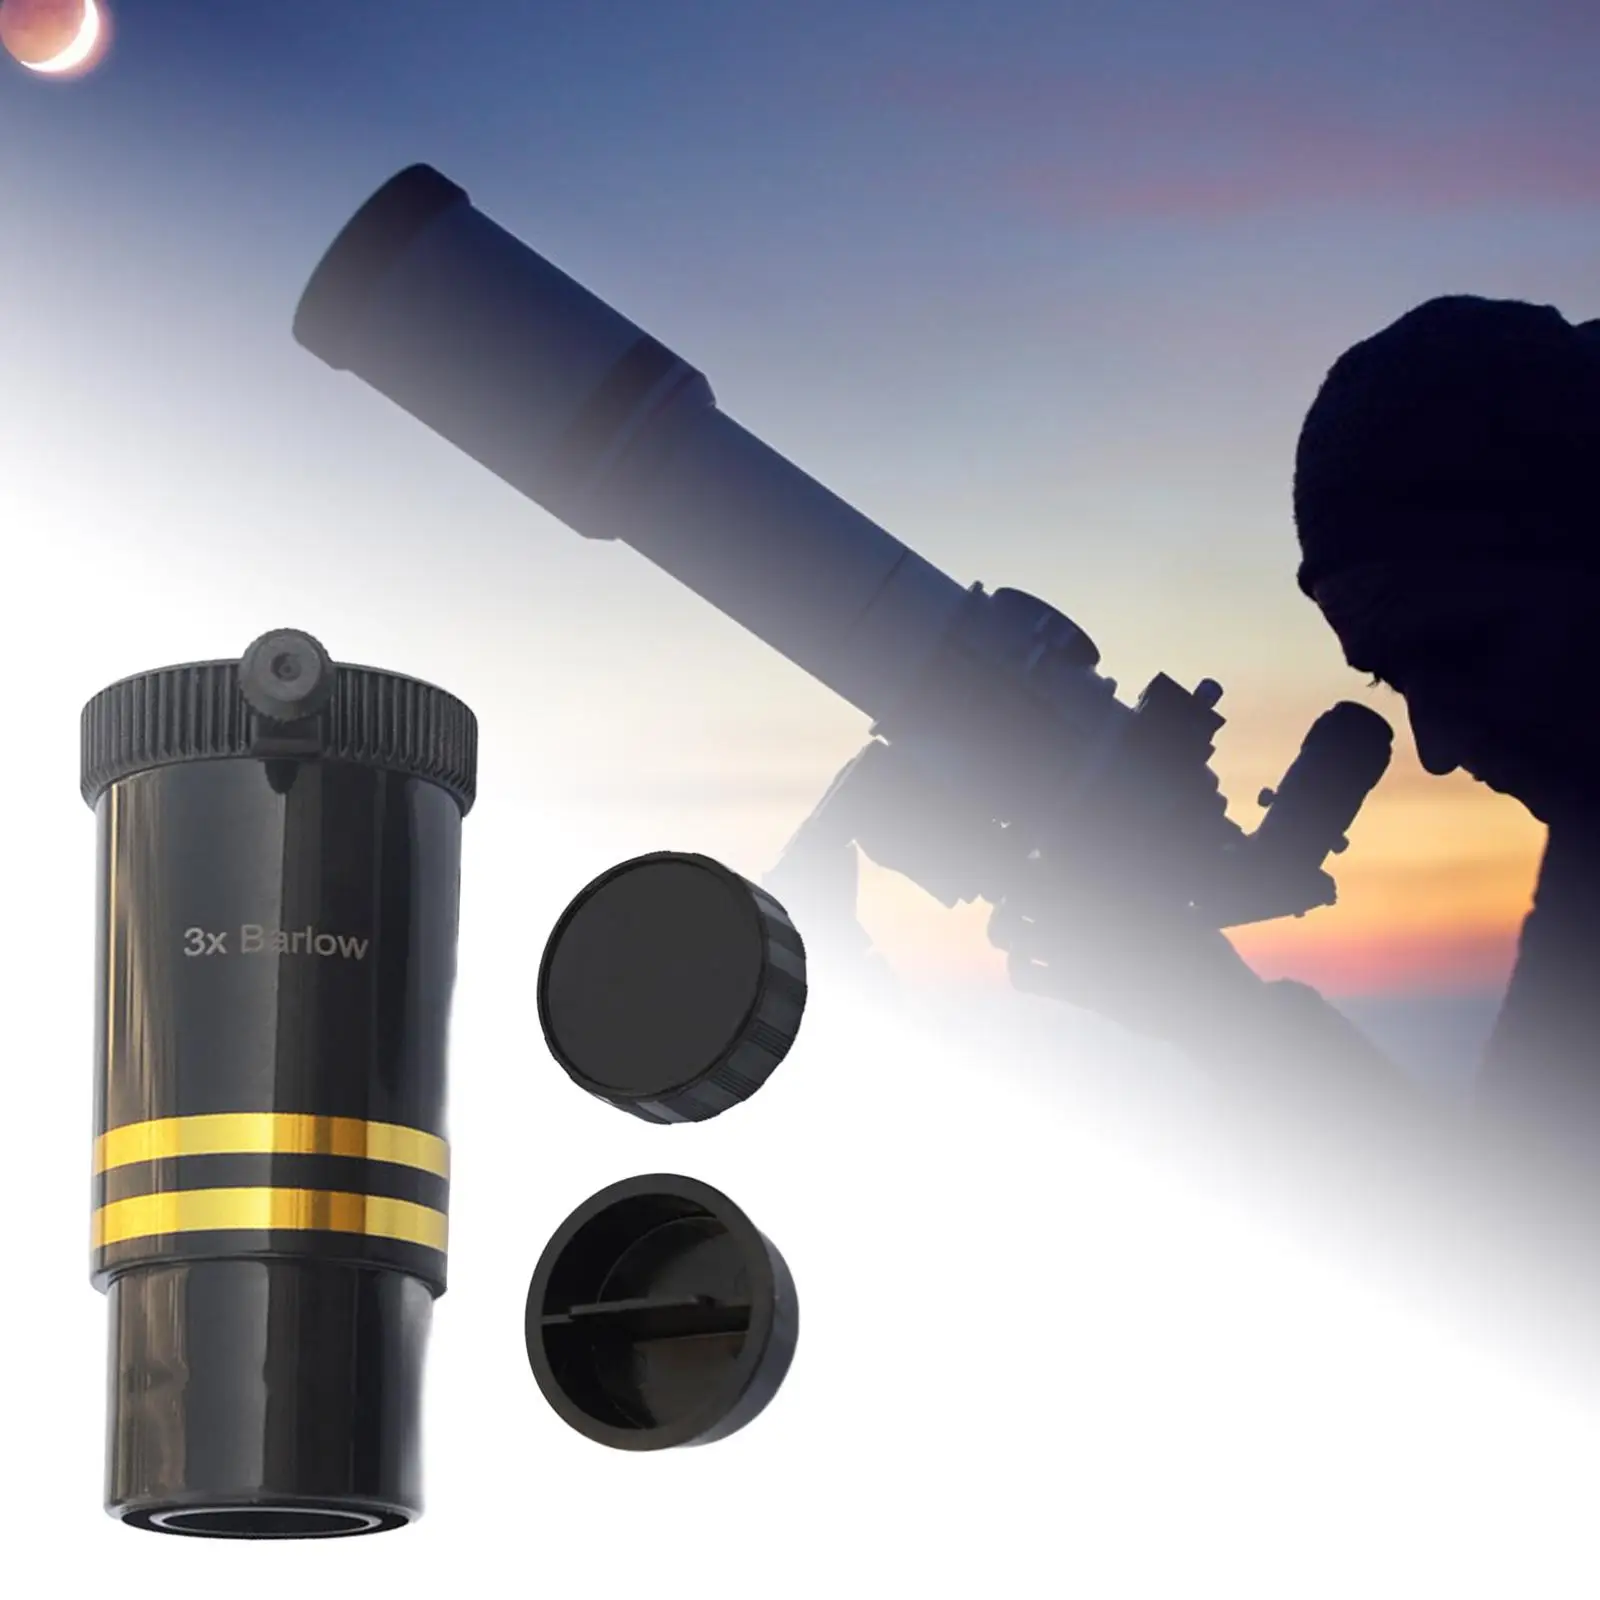 3x Barlow Lens Magnification Multi Coated Professional 1.25 inch Telescope